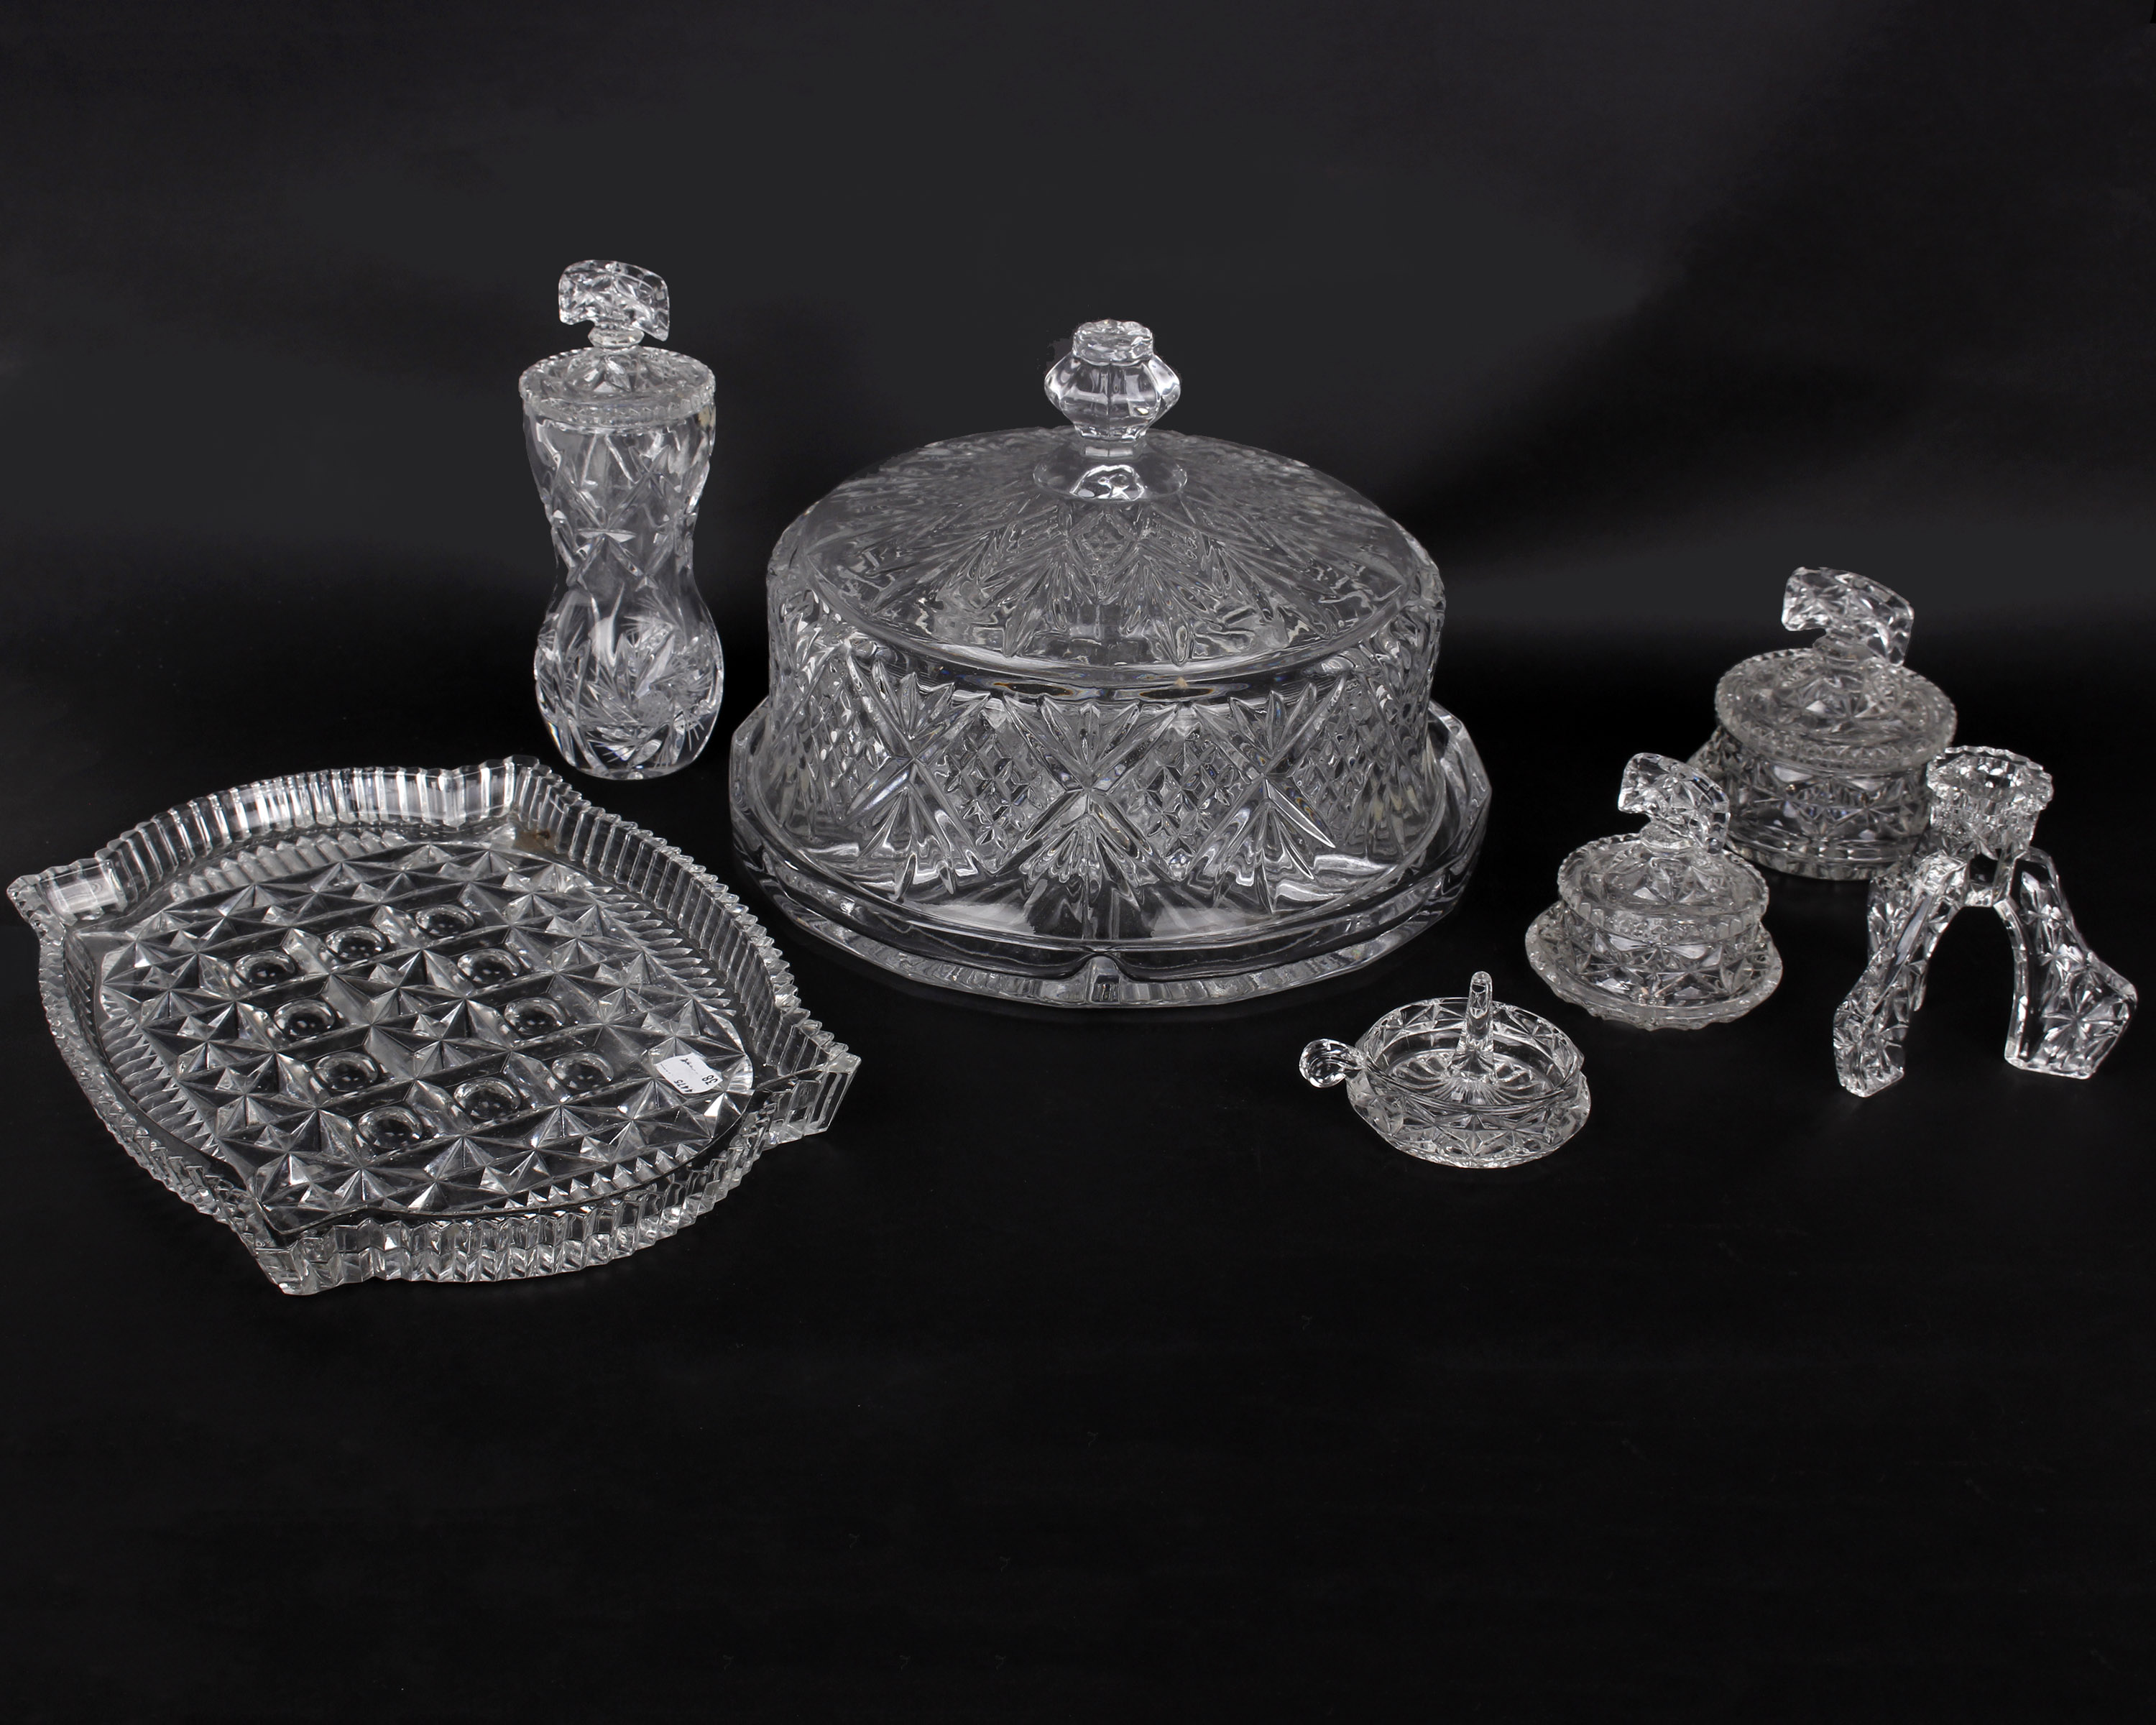 A boxed Argyle Cut Crystal section cake cover and nibbles dish plus various other cut crystal